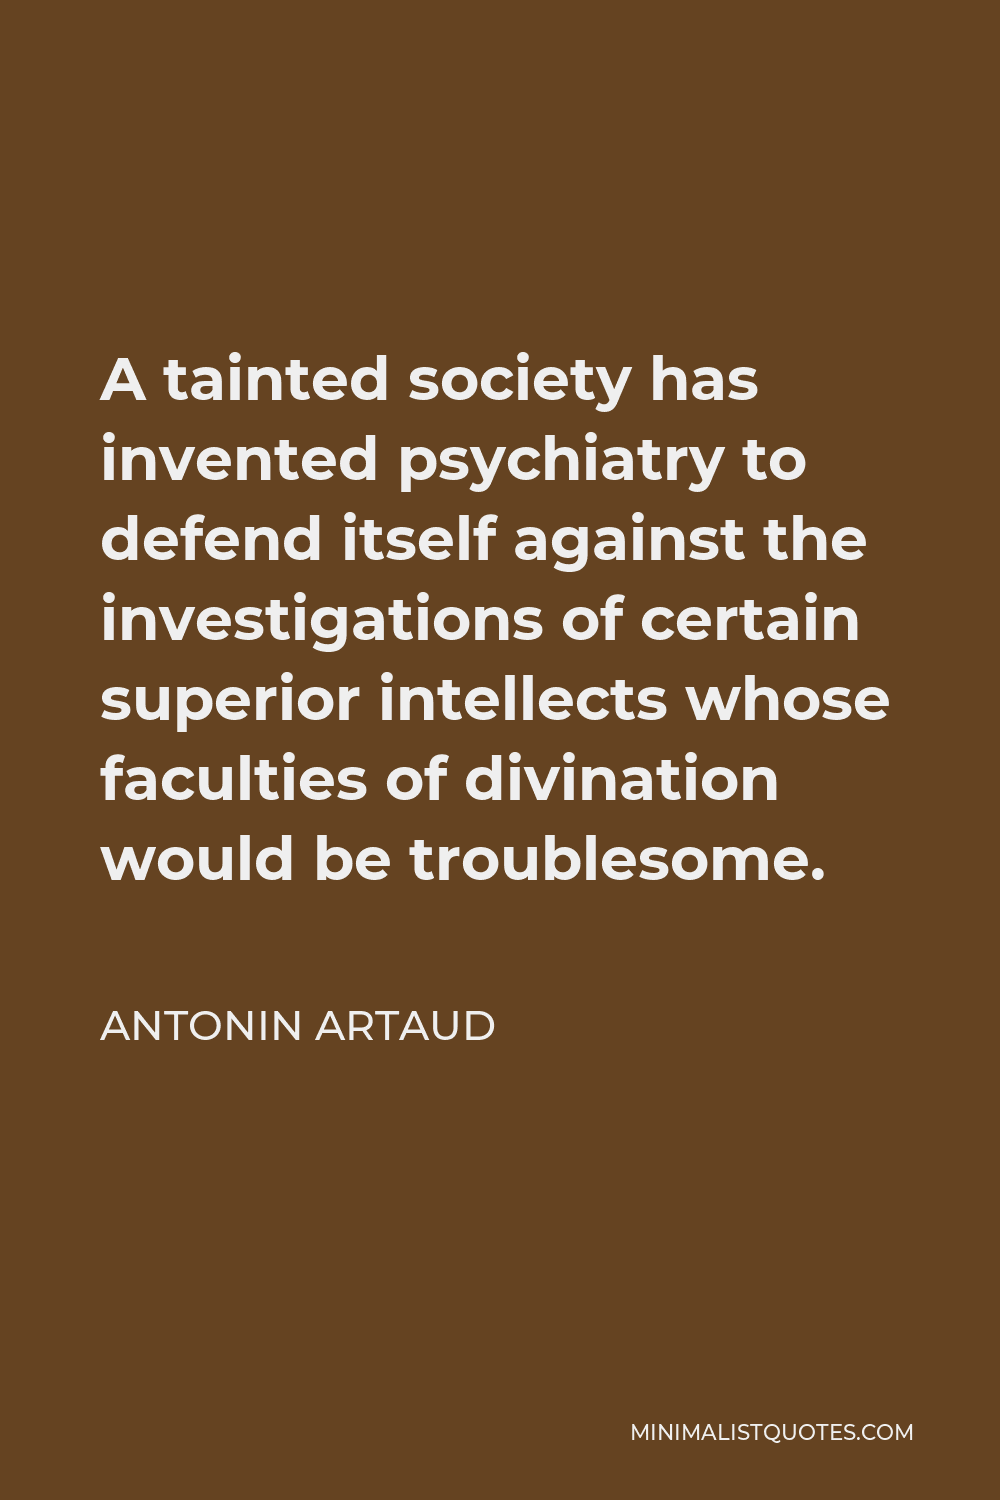 Antonin Artaud Quote - A tainted society has invented psychiatry to defend itself against the investigations of certain superior intellects whose faculties of divination would be troublesome.